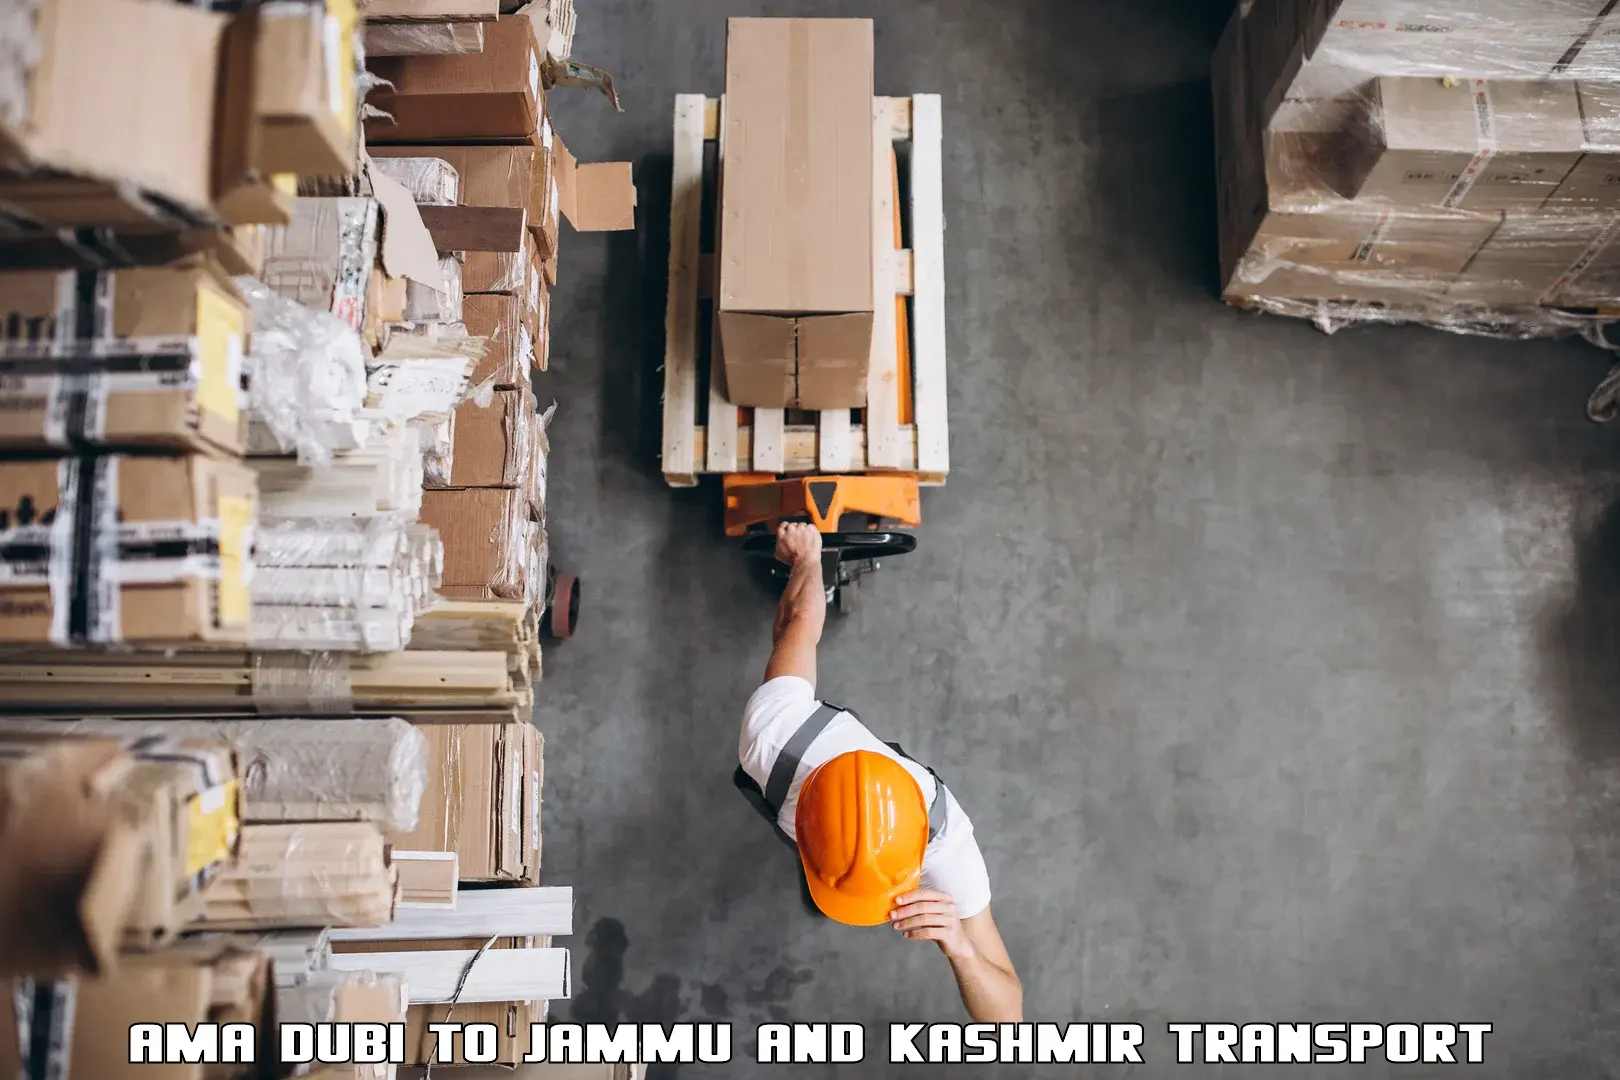 Package delivery services Ama Dubi to Jammu and Kashmir